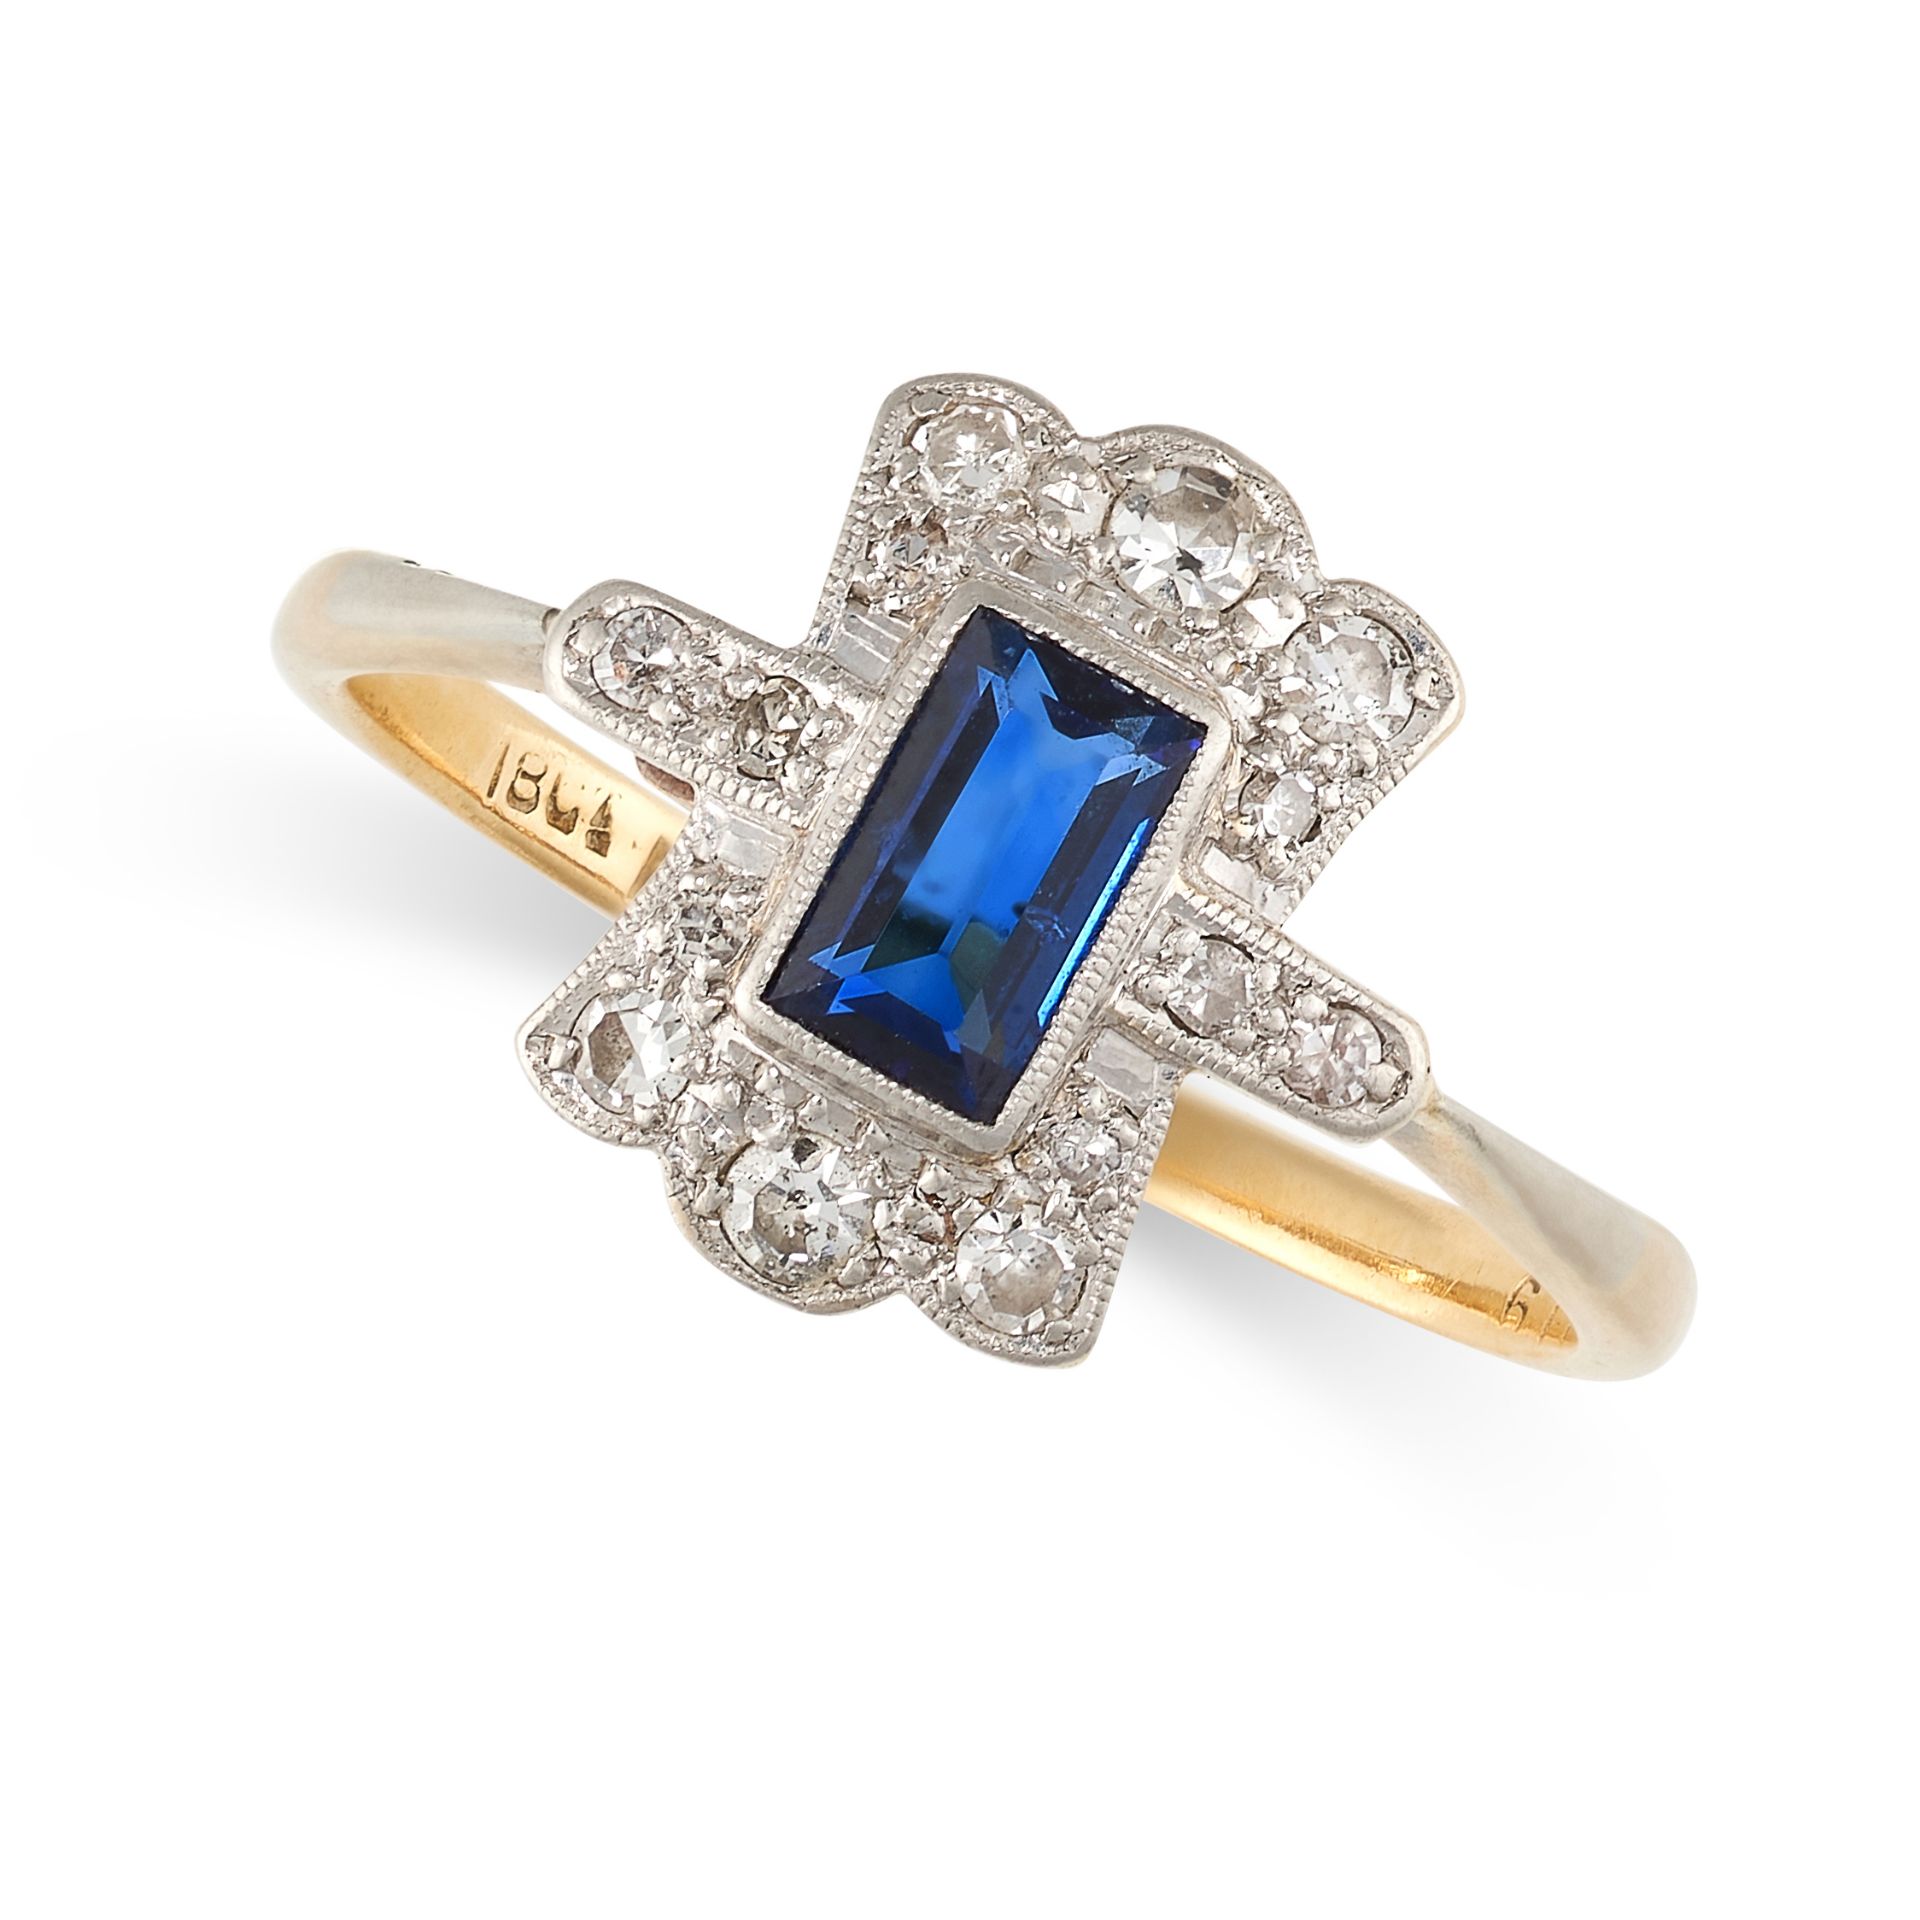 NO RESERVE - A SAPPHIRE AND DIAMOND DRESS RING in 18ct yellow gold and platinum, set with a baguette